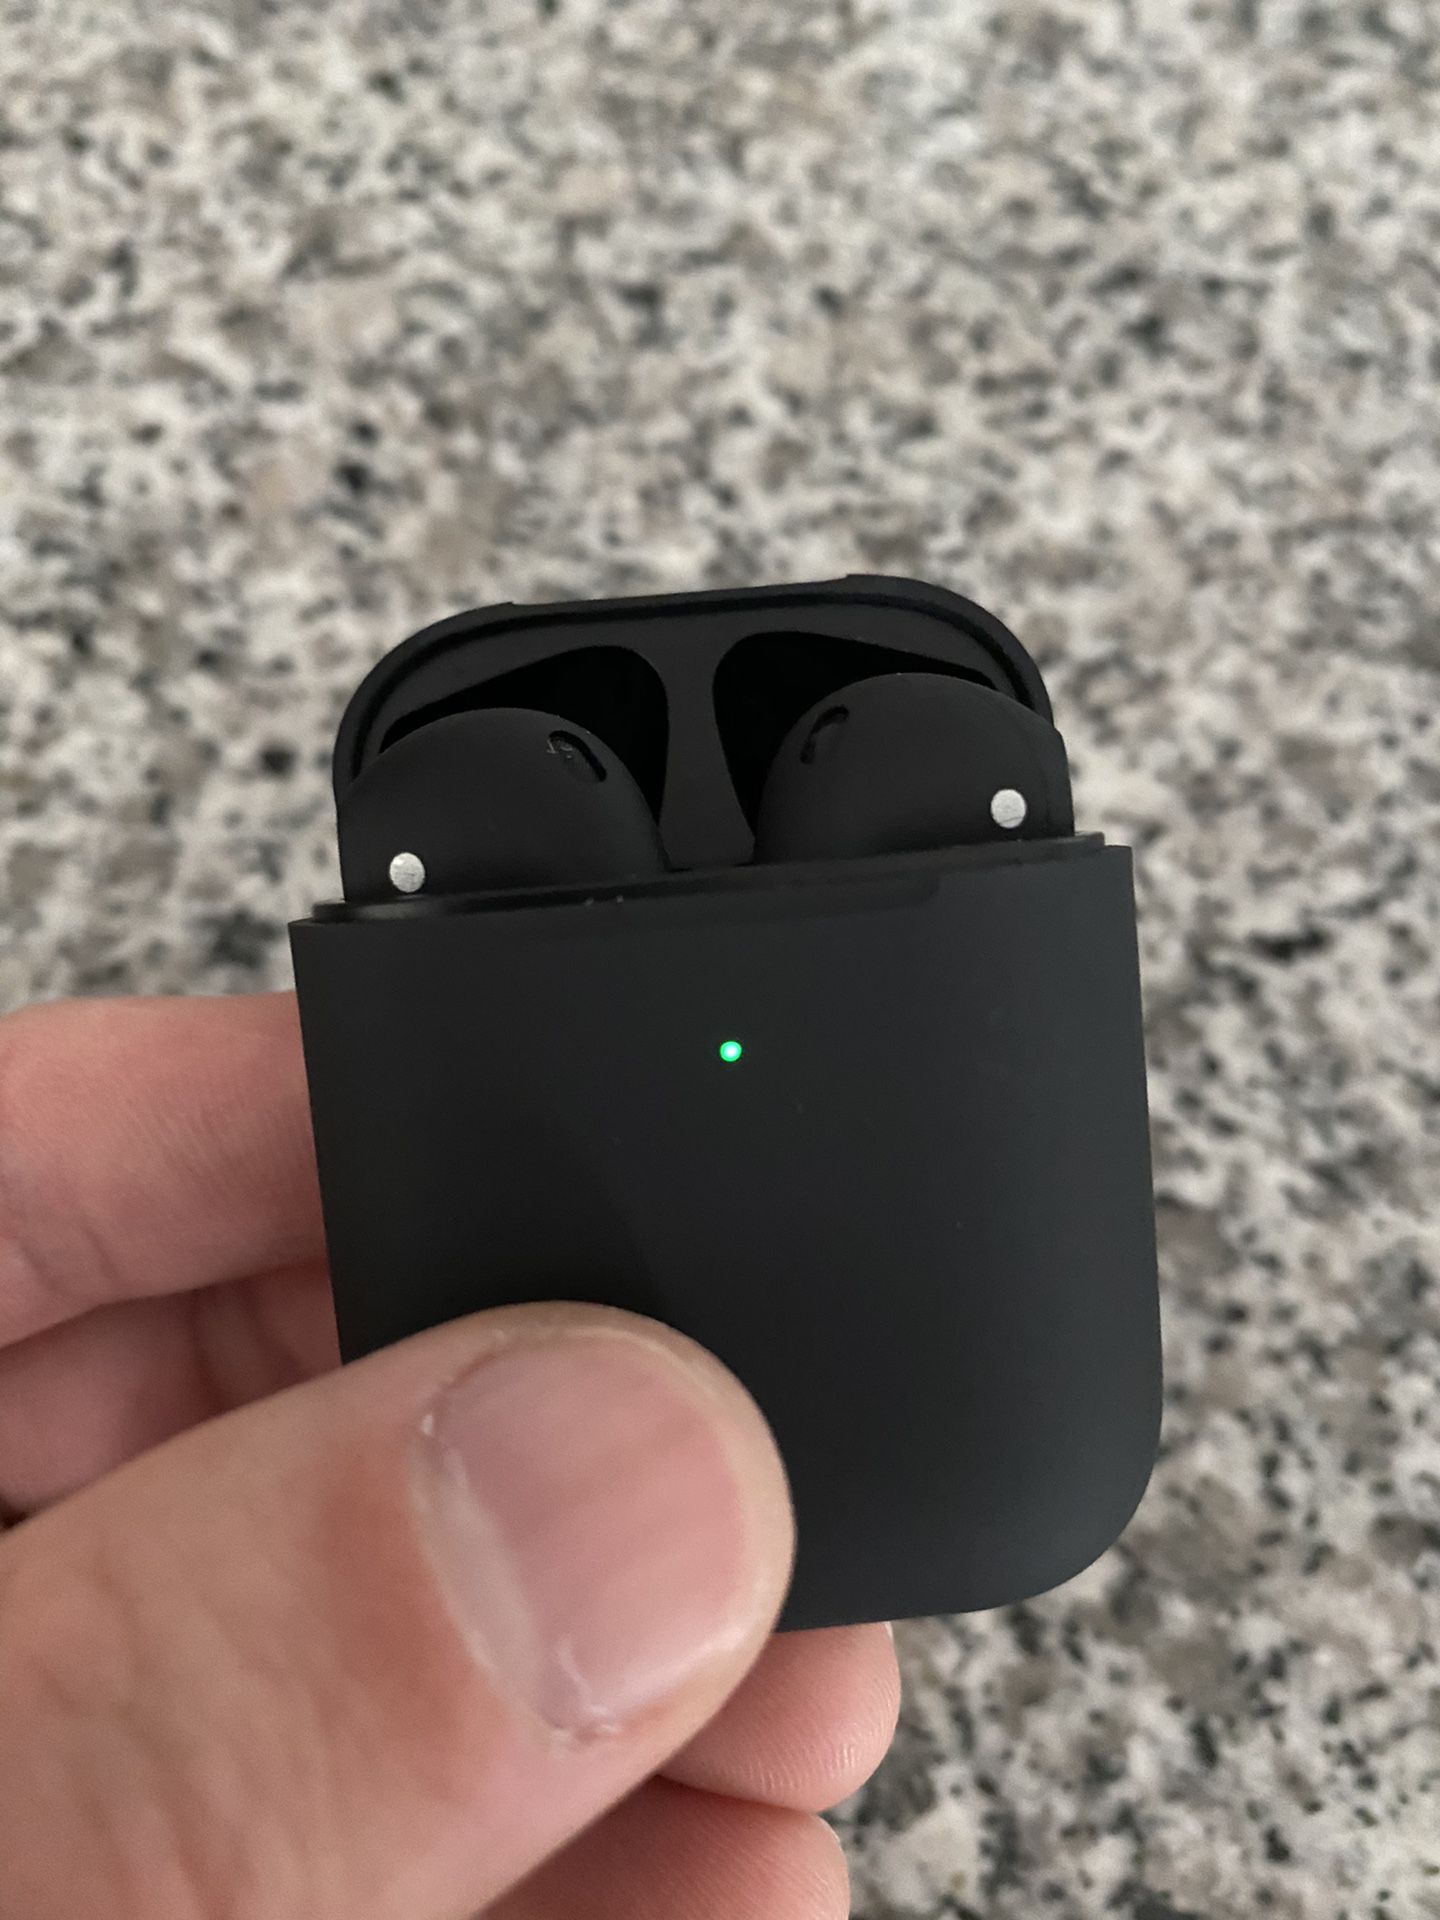 Brand New Sealed 1:1 MatteBlack Earbuds Airpods Style with Wireless Charging Case